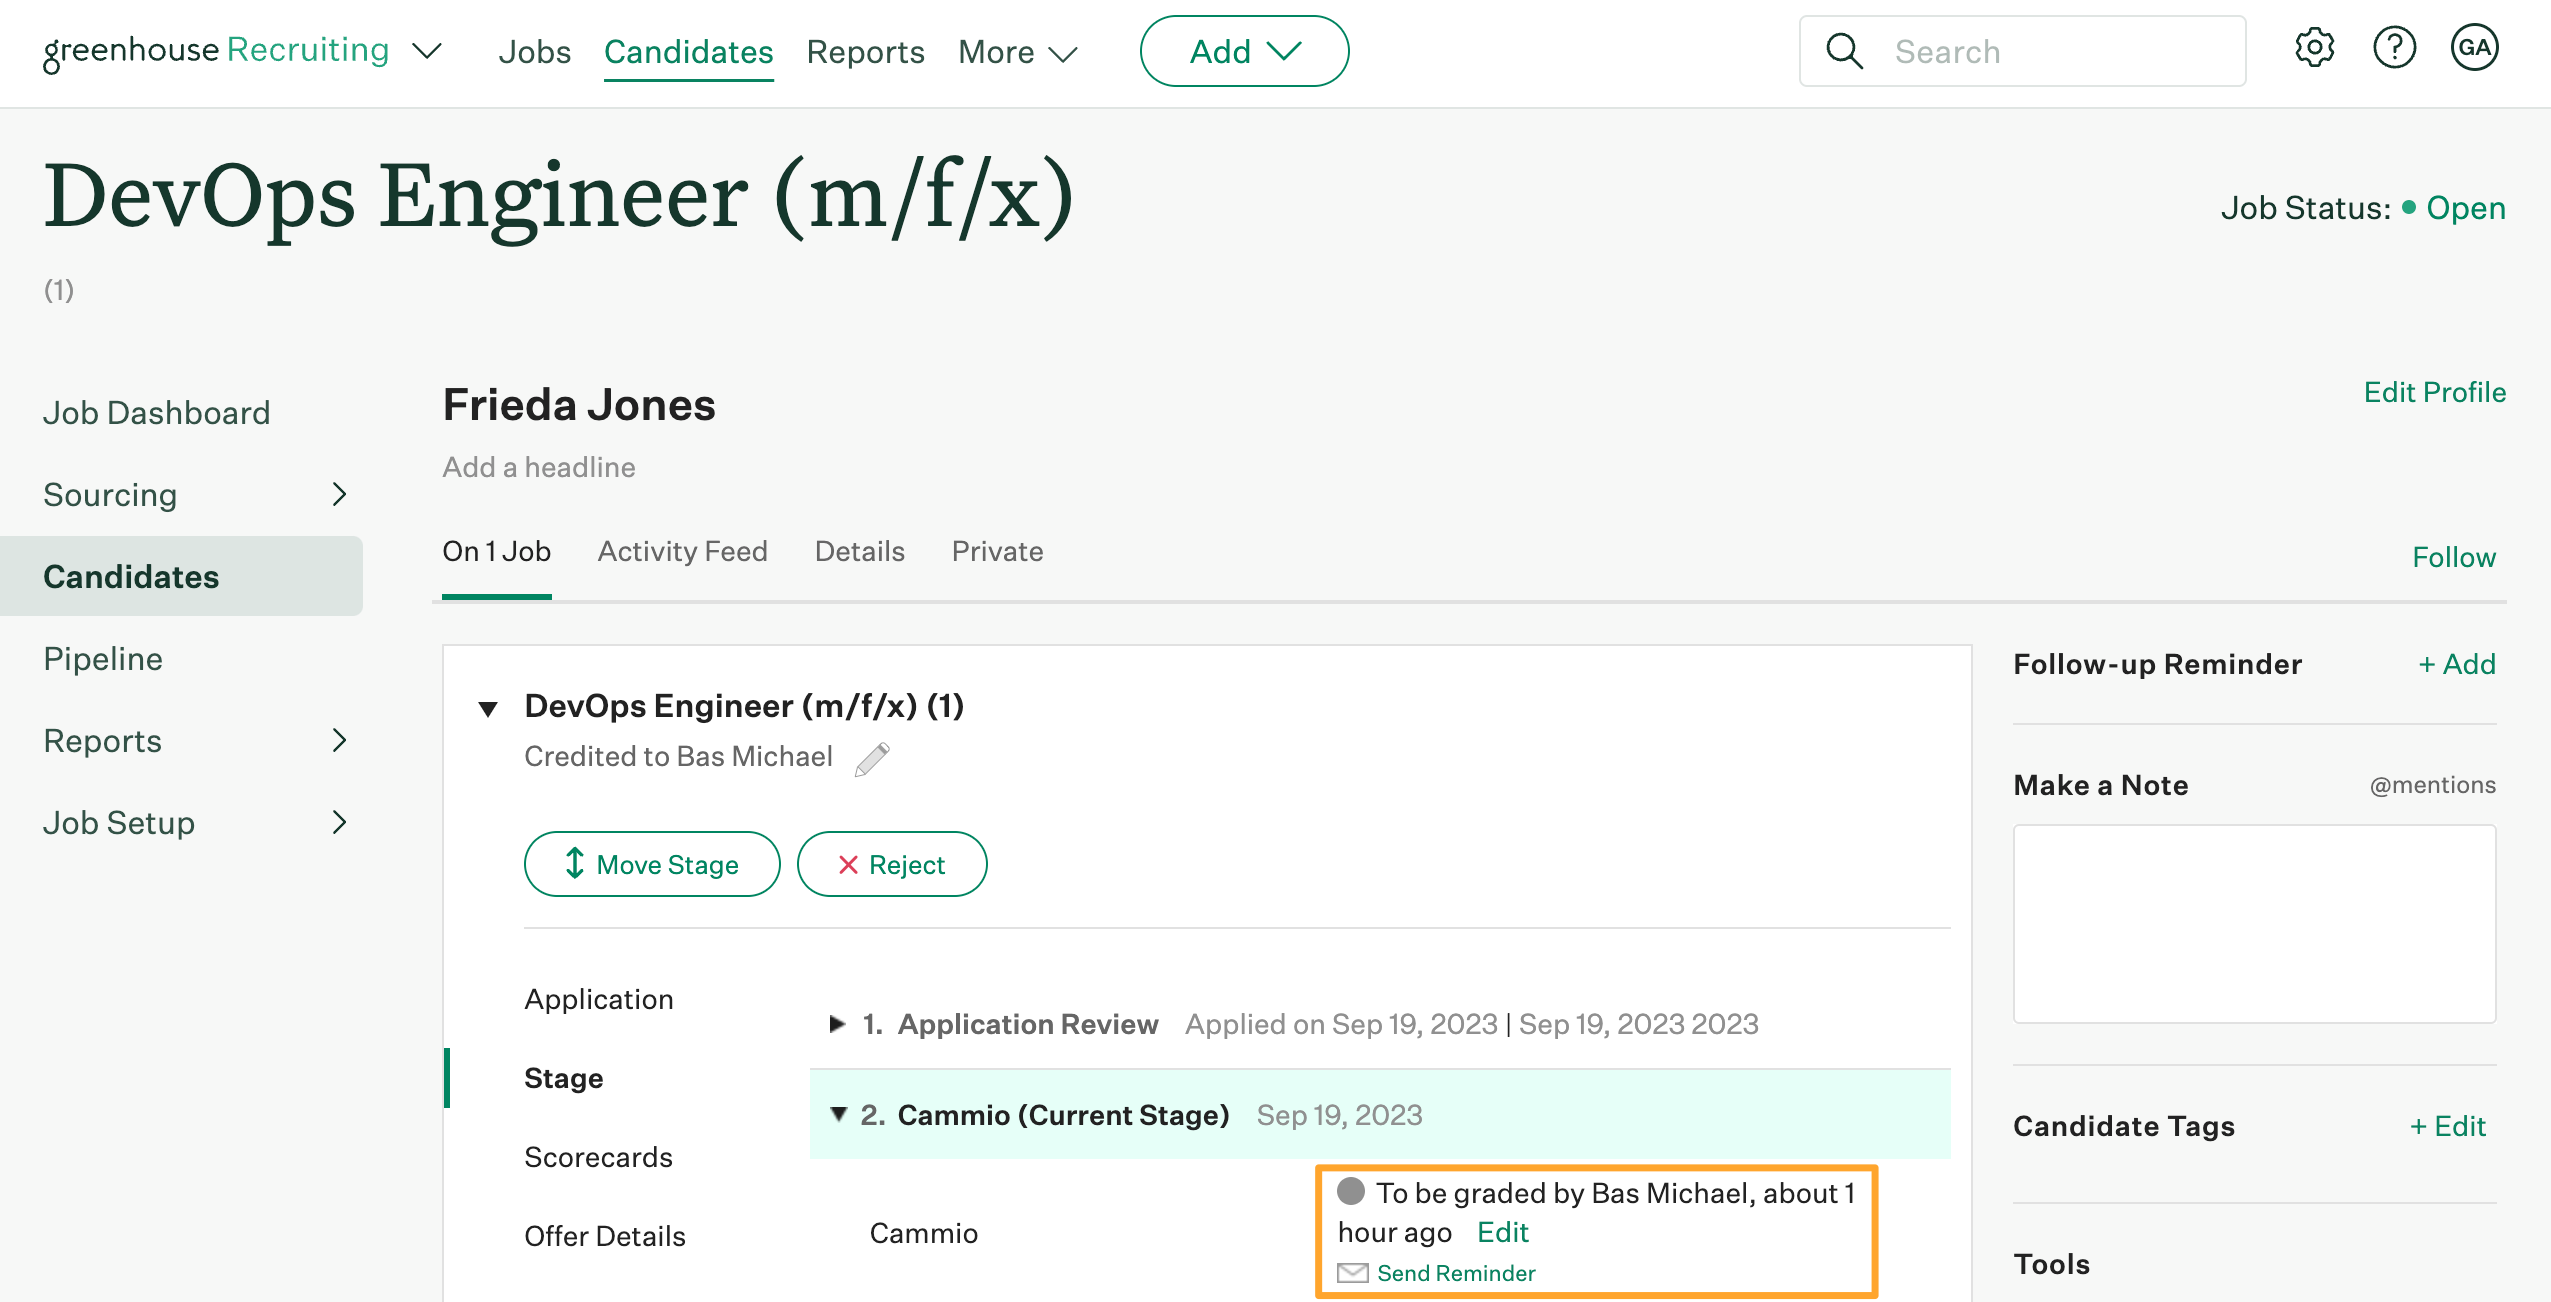 The Cammio integration on Greenhouse Recruiting shows an example candidate named Frieda Jones on the Cammio interview stage with their assessment ready to be graded by Bas Michael